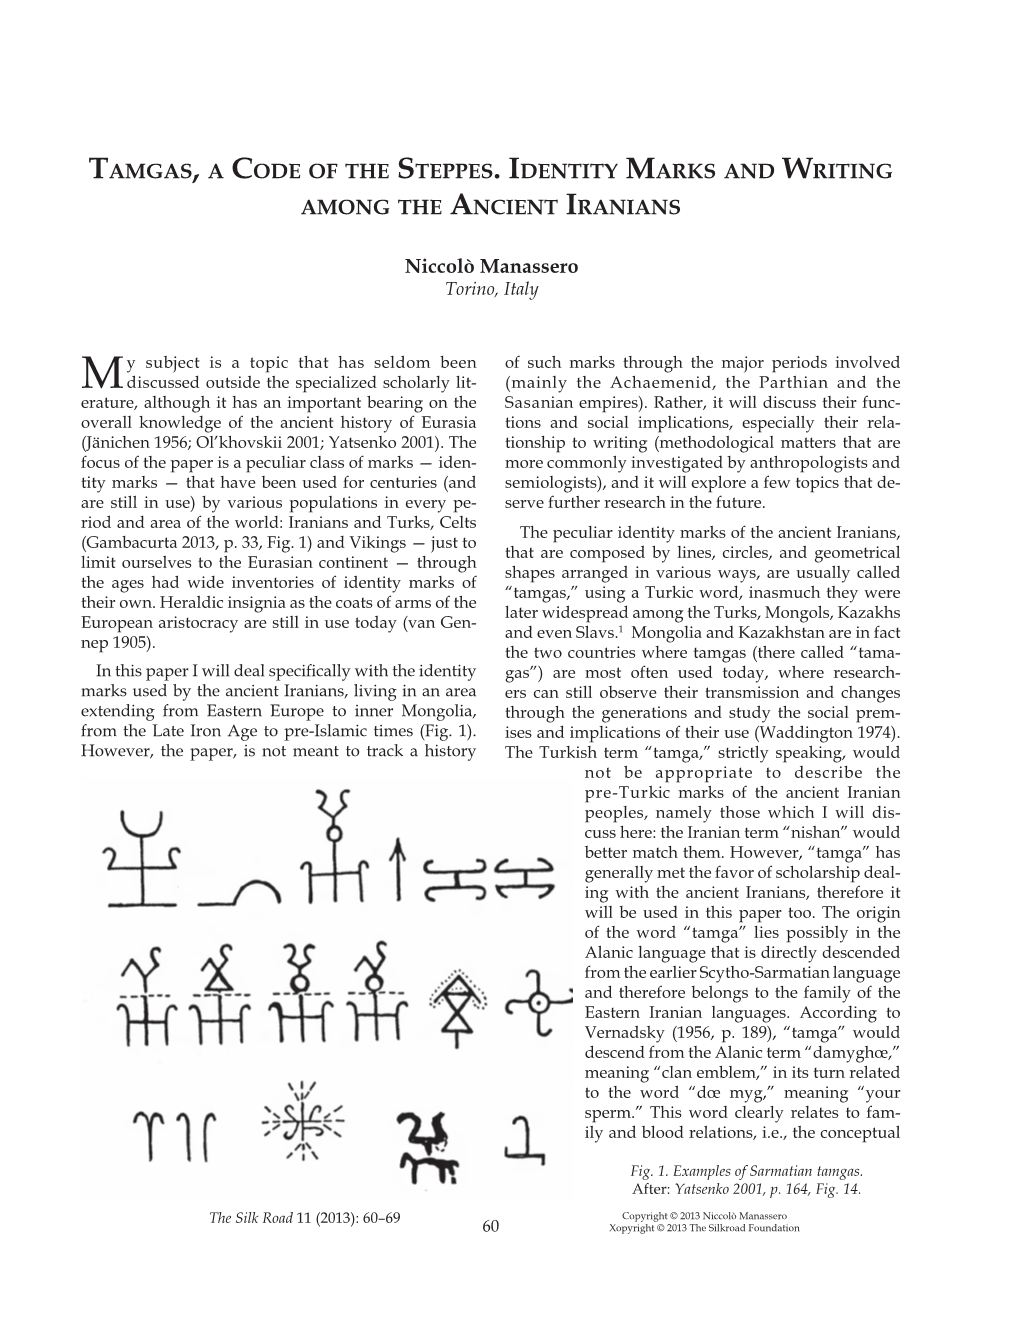 Tamgas, a Code of the Steppes. Identity Marks and Writing Among the Ancient Iranians